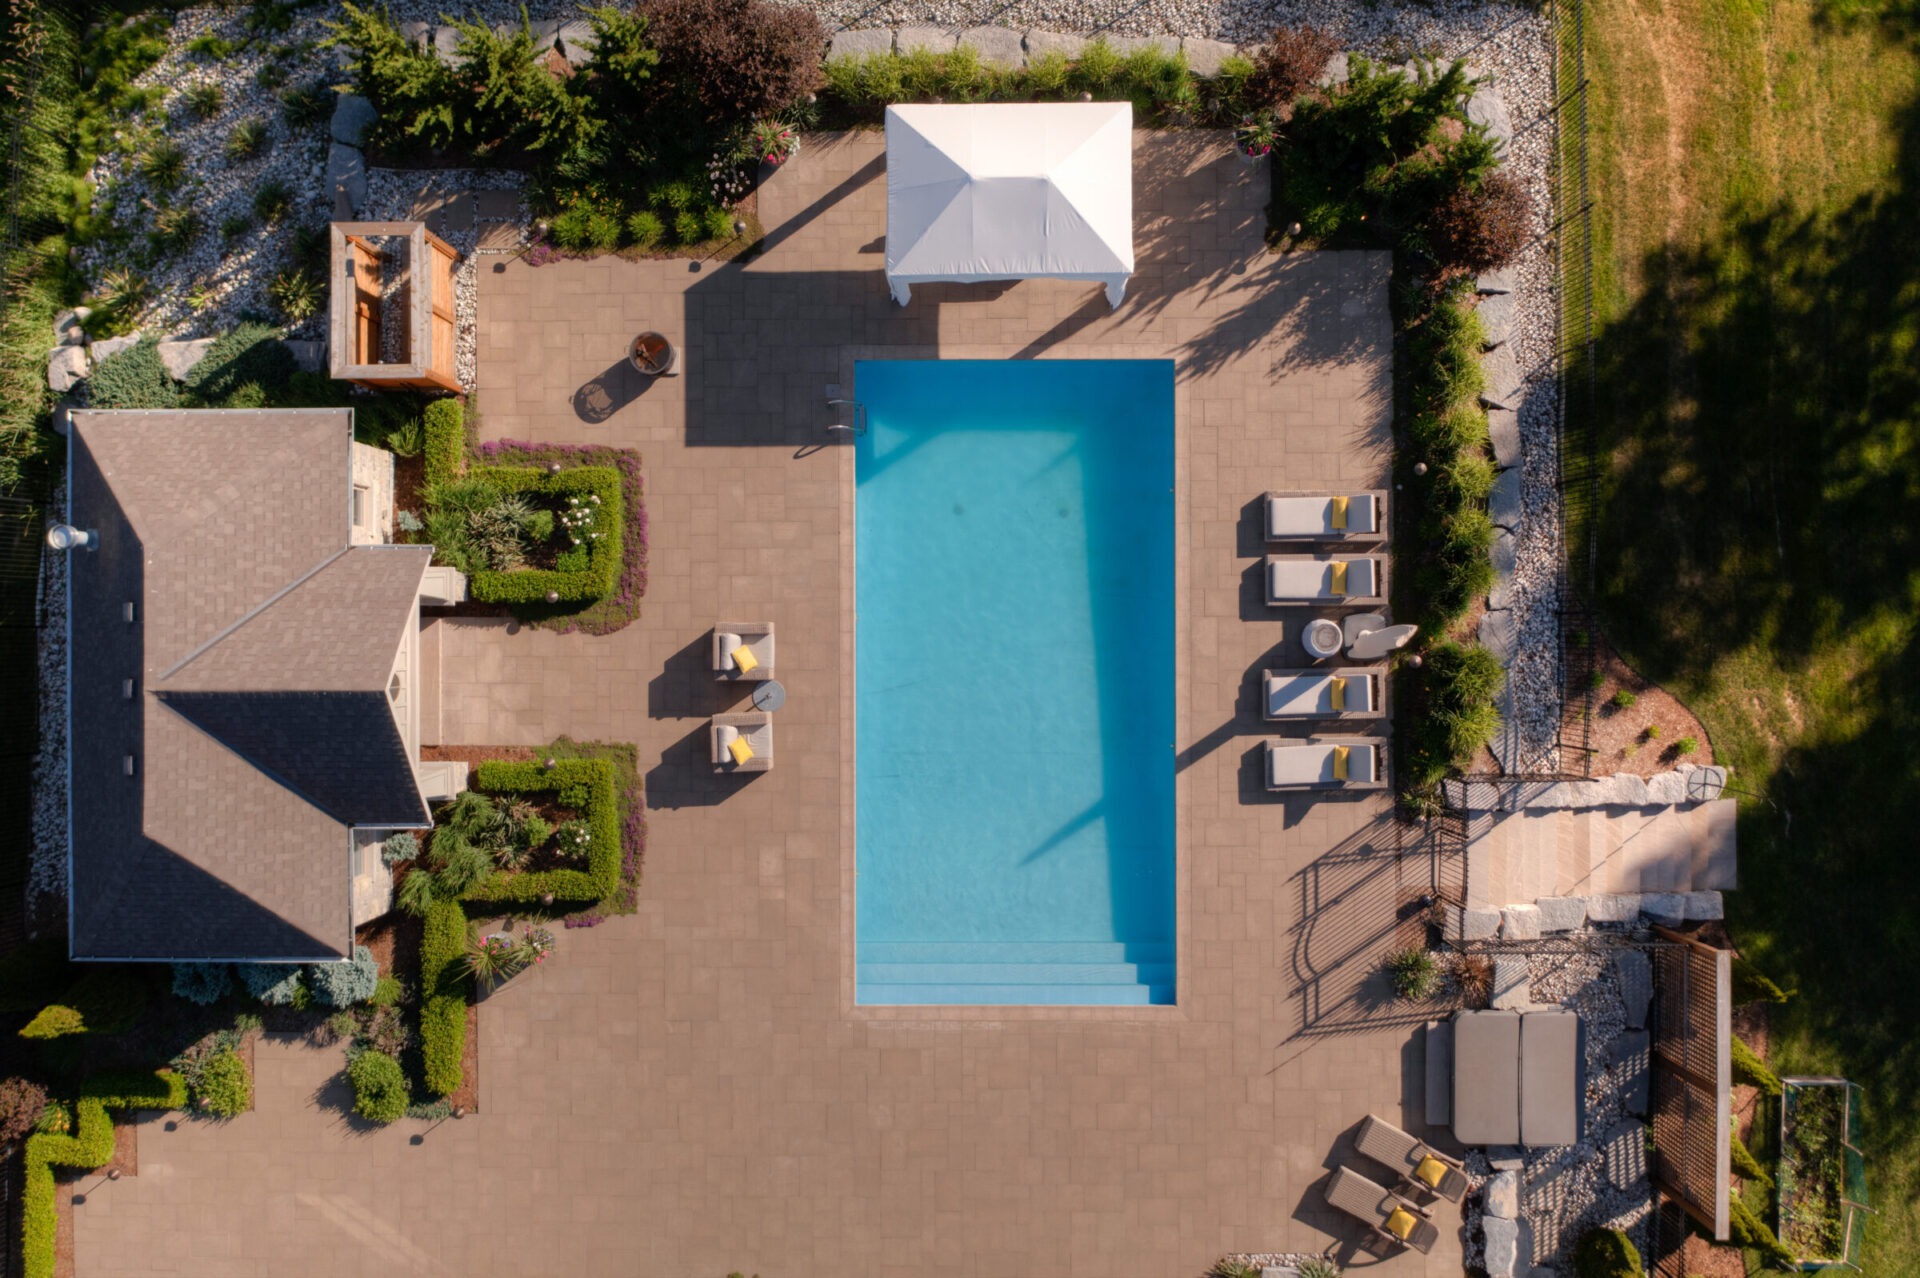 Aerial view of a neat backyard with a large rectangular pool, patio, loungers, landscaped garden, and sections of a residential building.